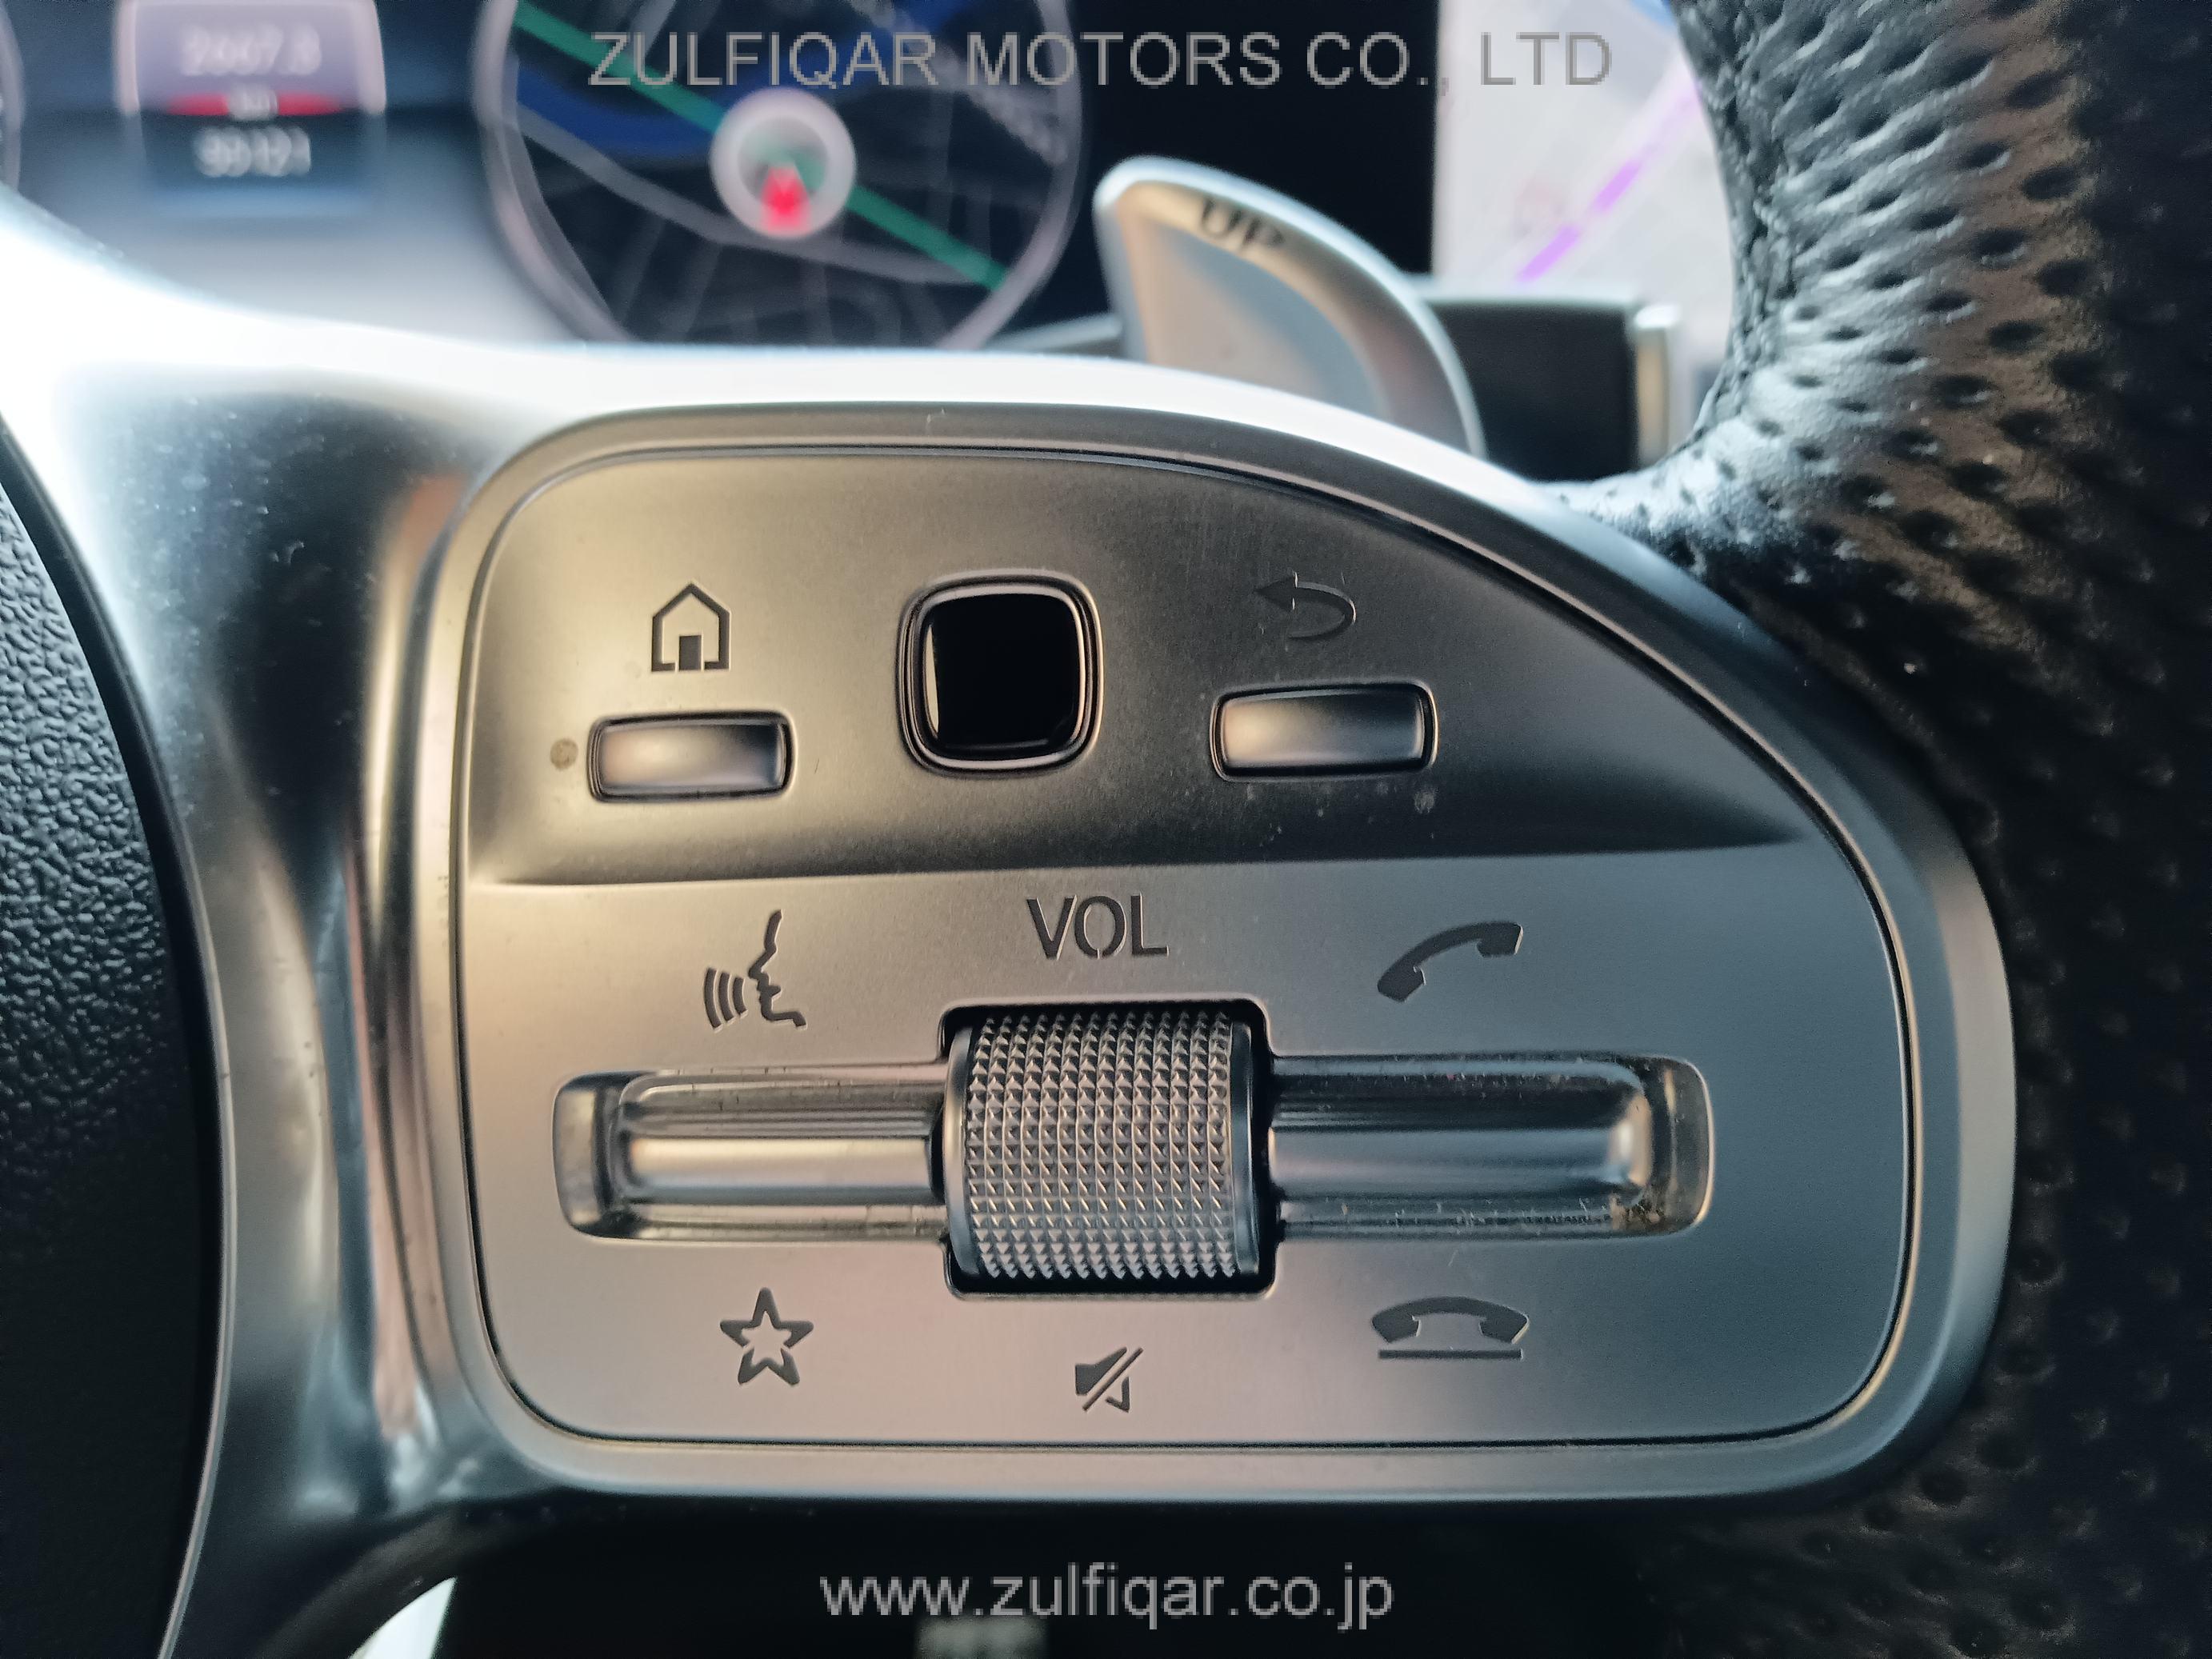 MERCEDES AMG G CLASS 2019 Image 74